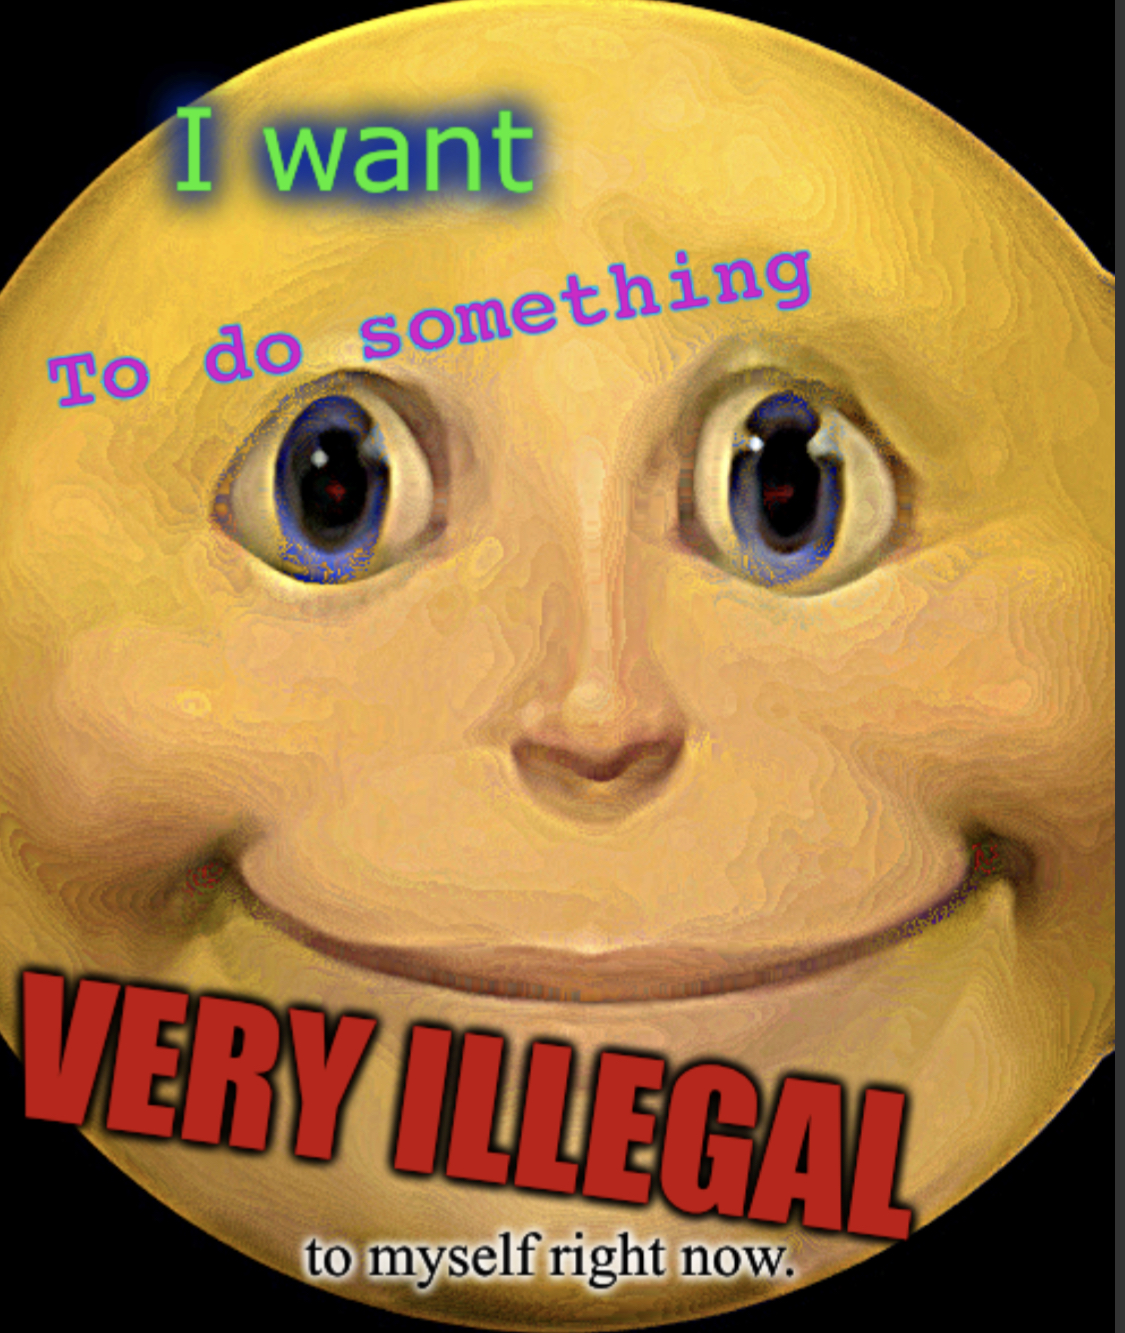 I want to do something very illegal to myself right now Blank Meme Template